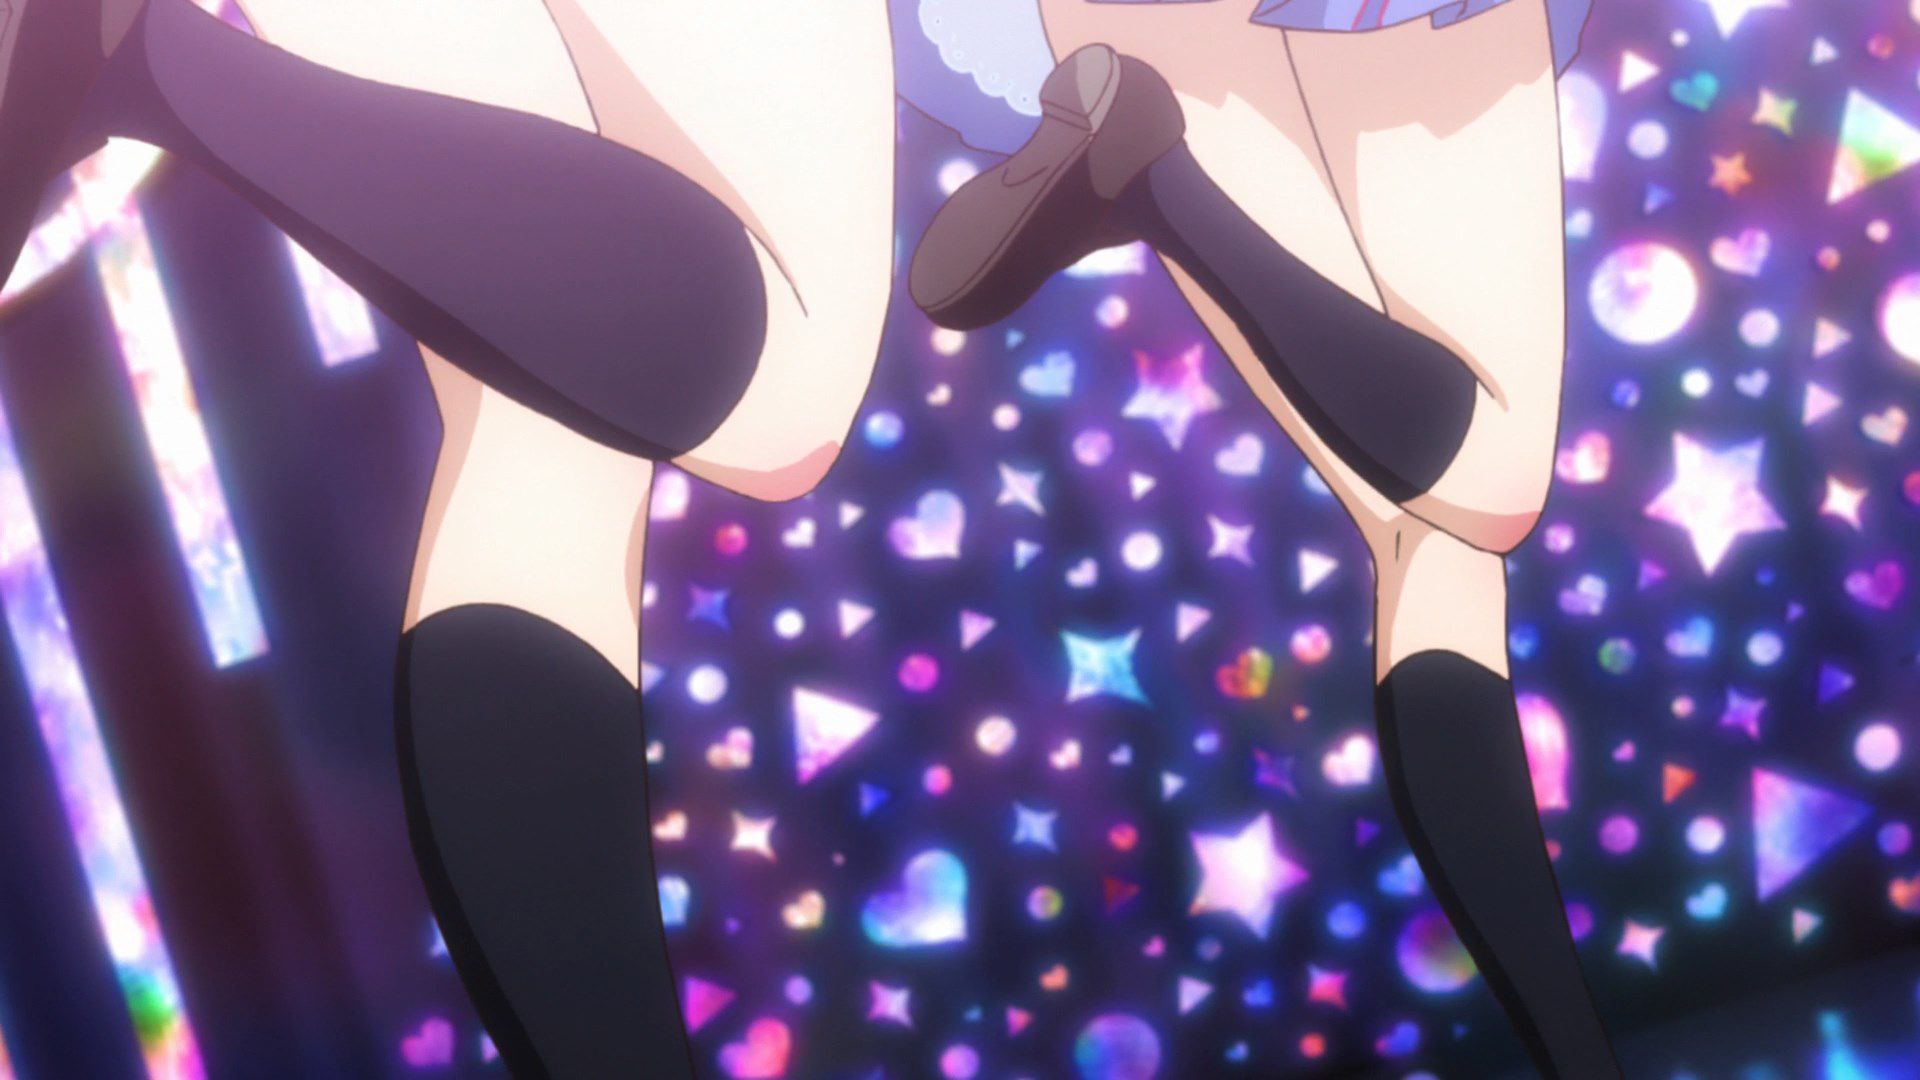 [God images] "love live! ' Μm ' PV's leg is too erotic everyone wakes up to a leg fetish of wwwww 48